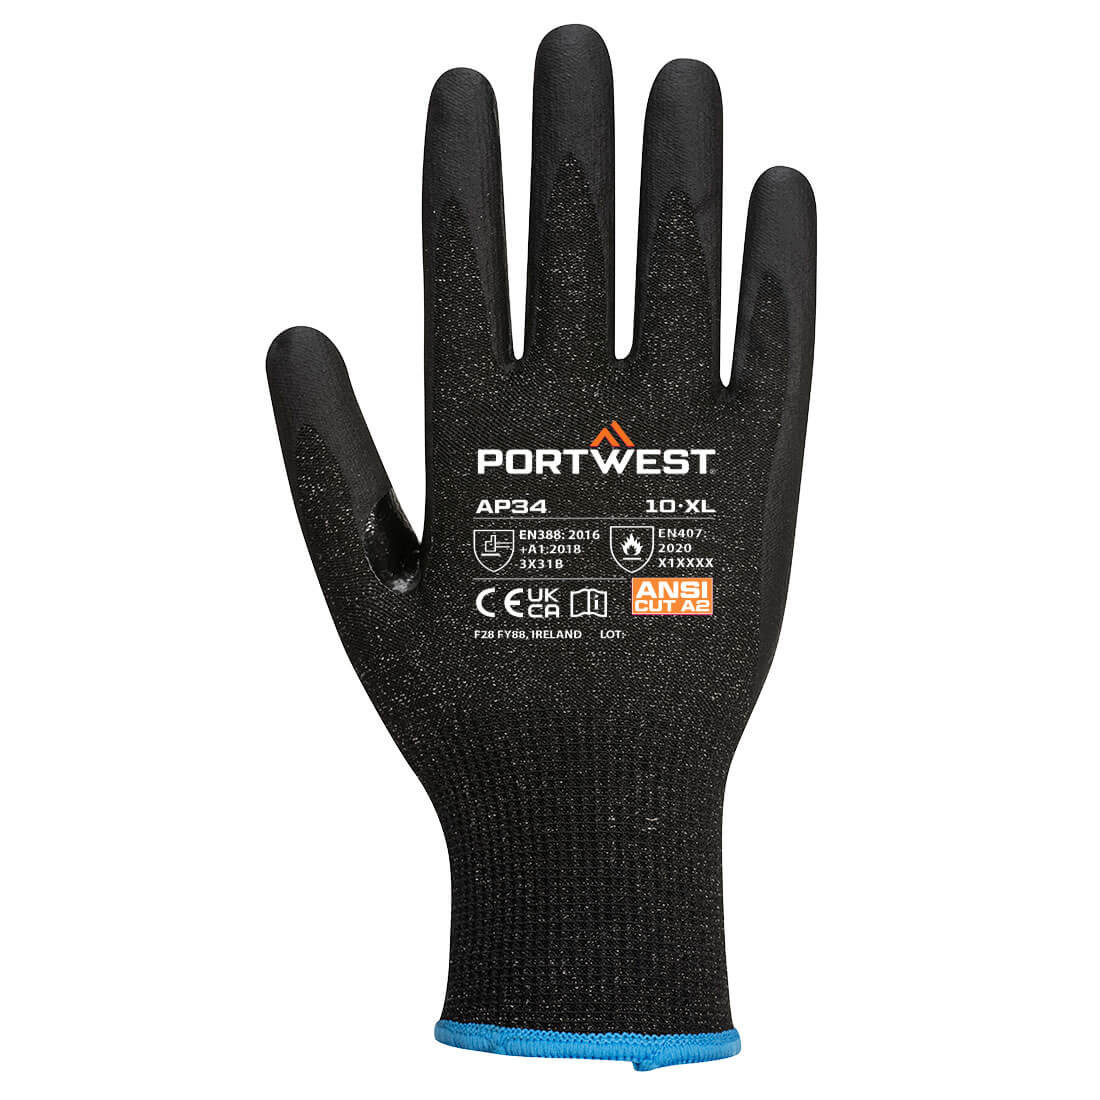 LR15 Nitrile Foam Touchscreen Glove - Personal protection